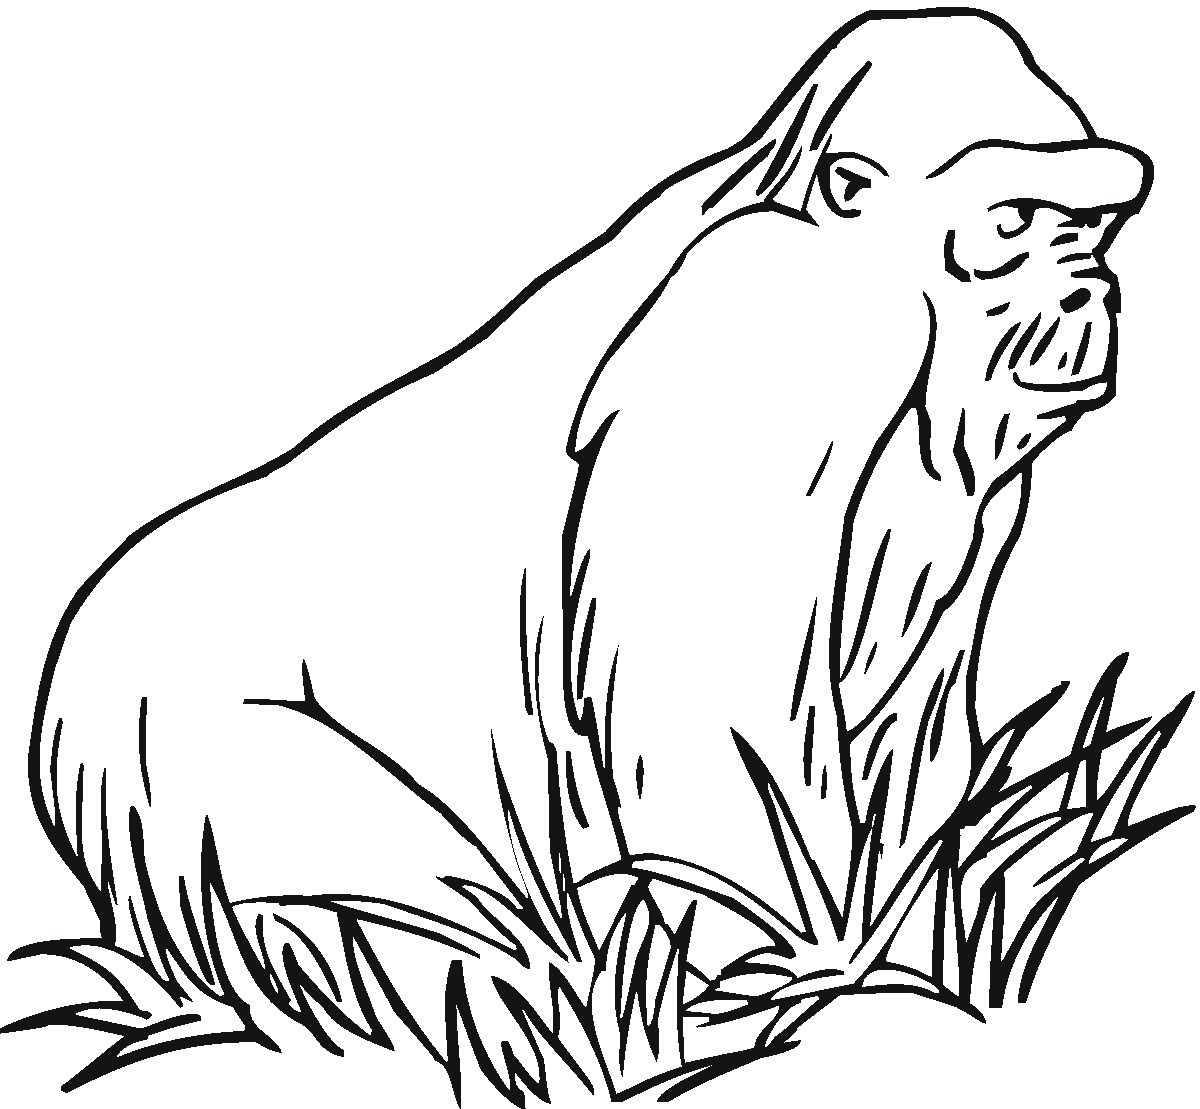 gorilla coloring pages gorilla coloring pages to download and print for free pages gorilla coloring 